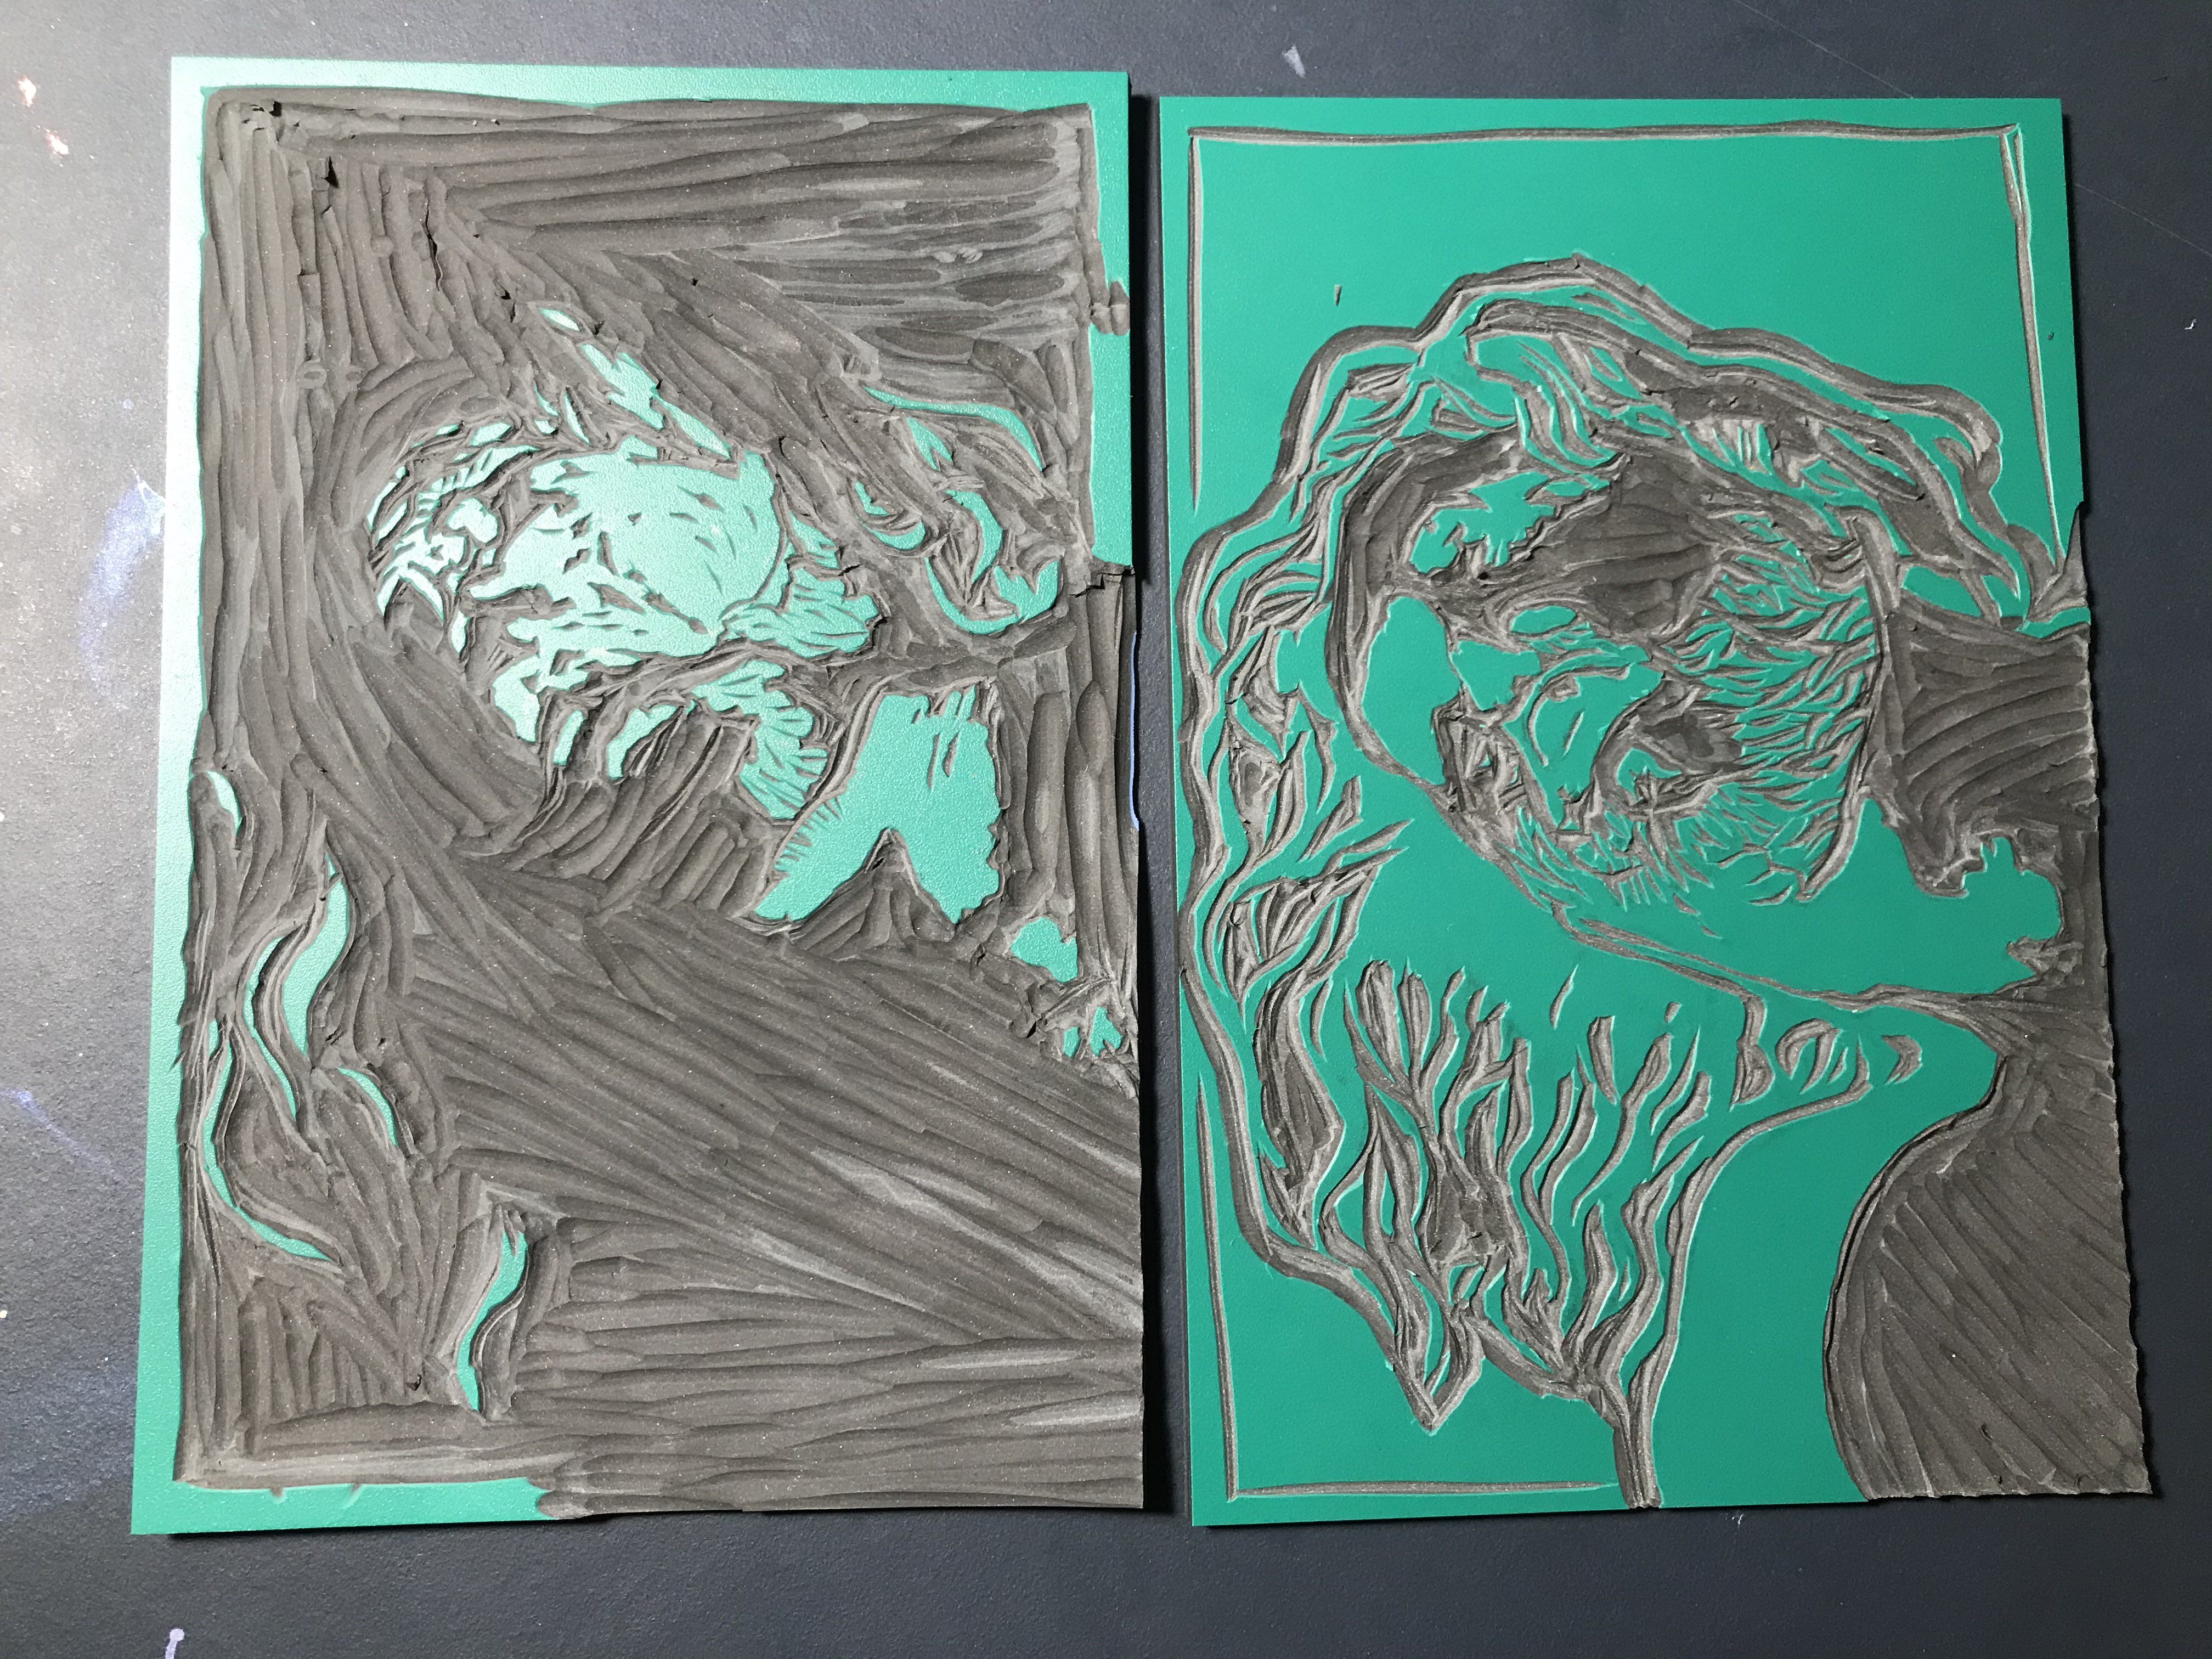 Two carved designs into Japanese Vinyl, a type of lino with a green exterior layer and a black inside. One shows an abstracted blood smear on someone's face, the other shows the shadows on that face in harsh light.